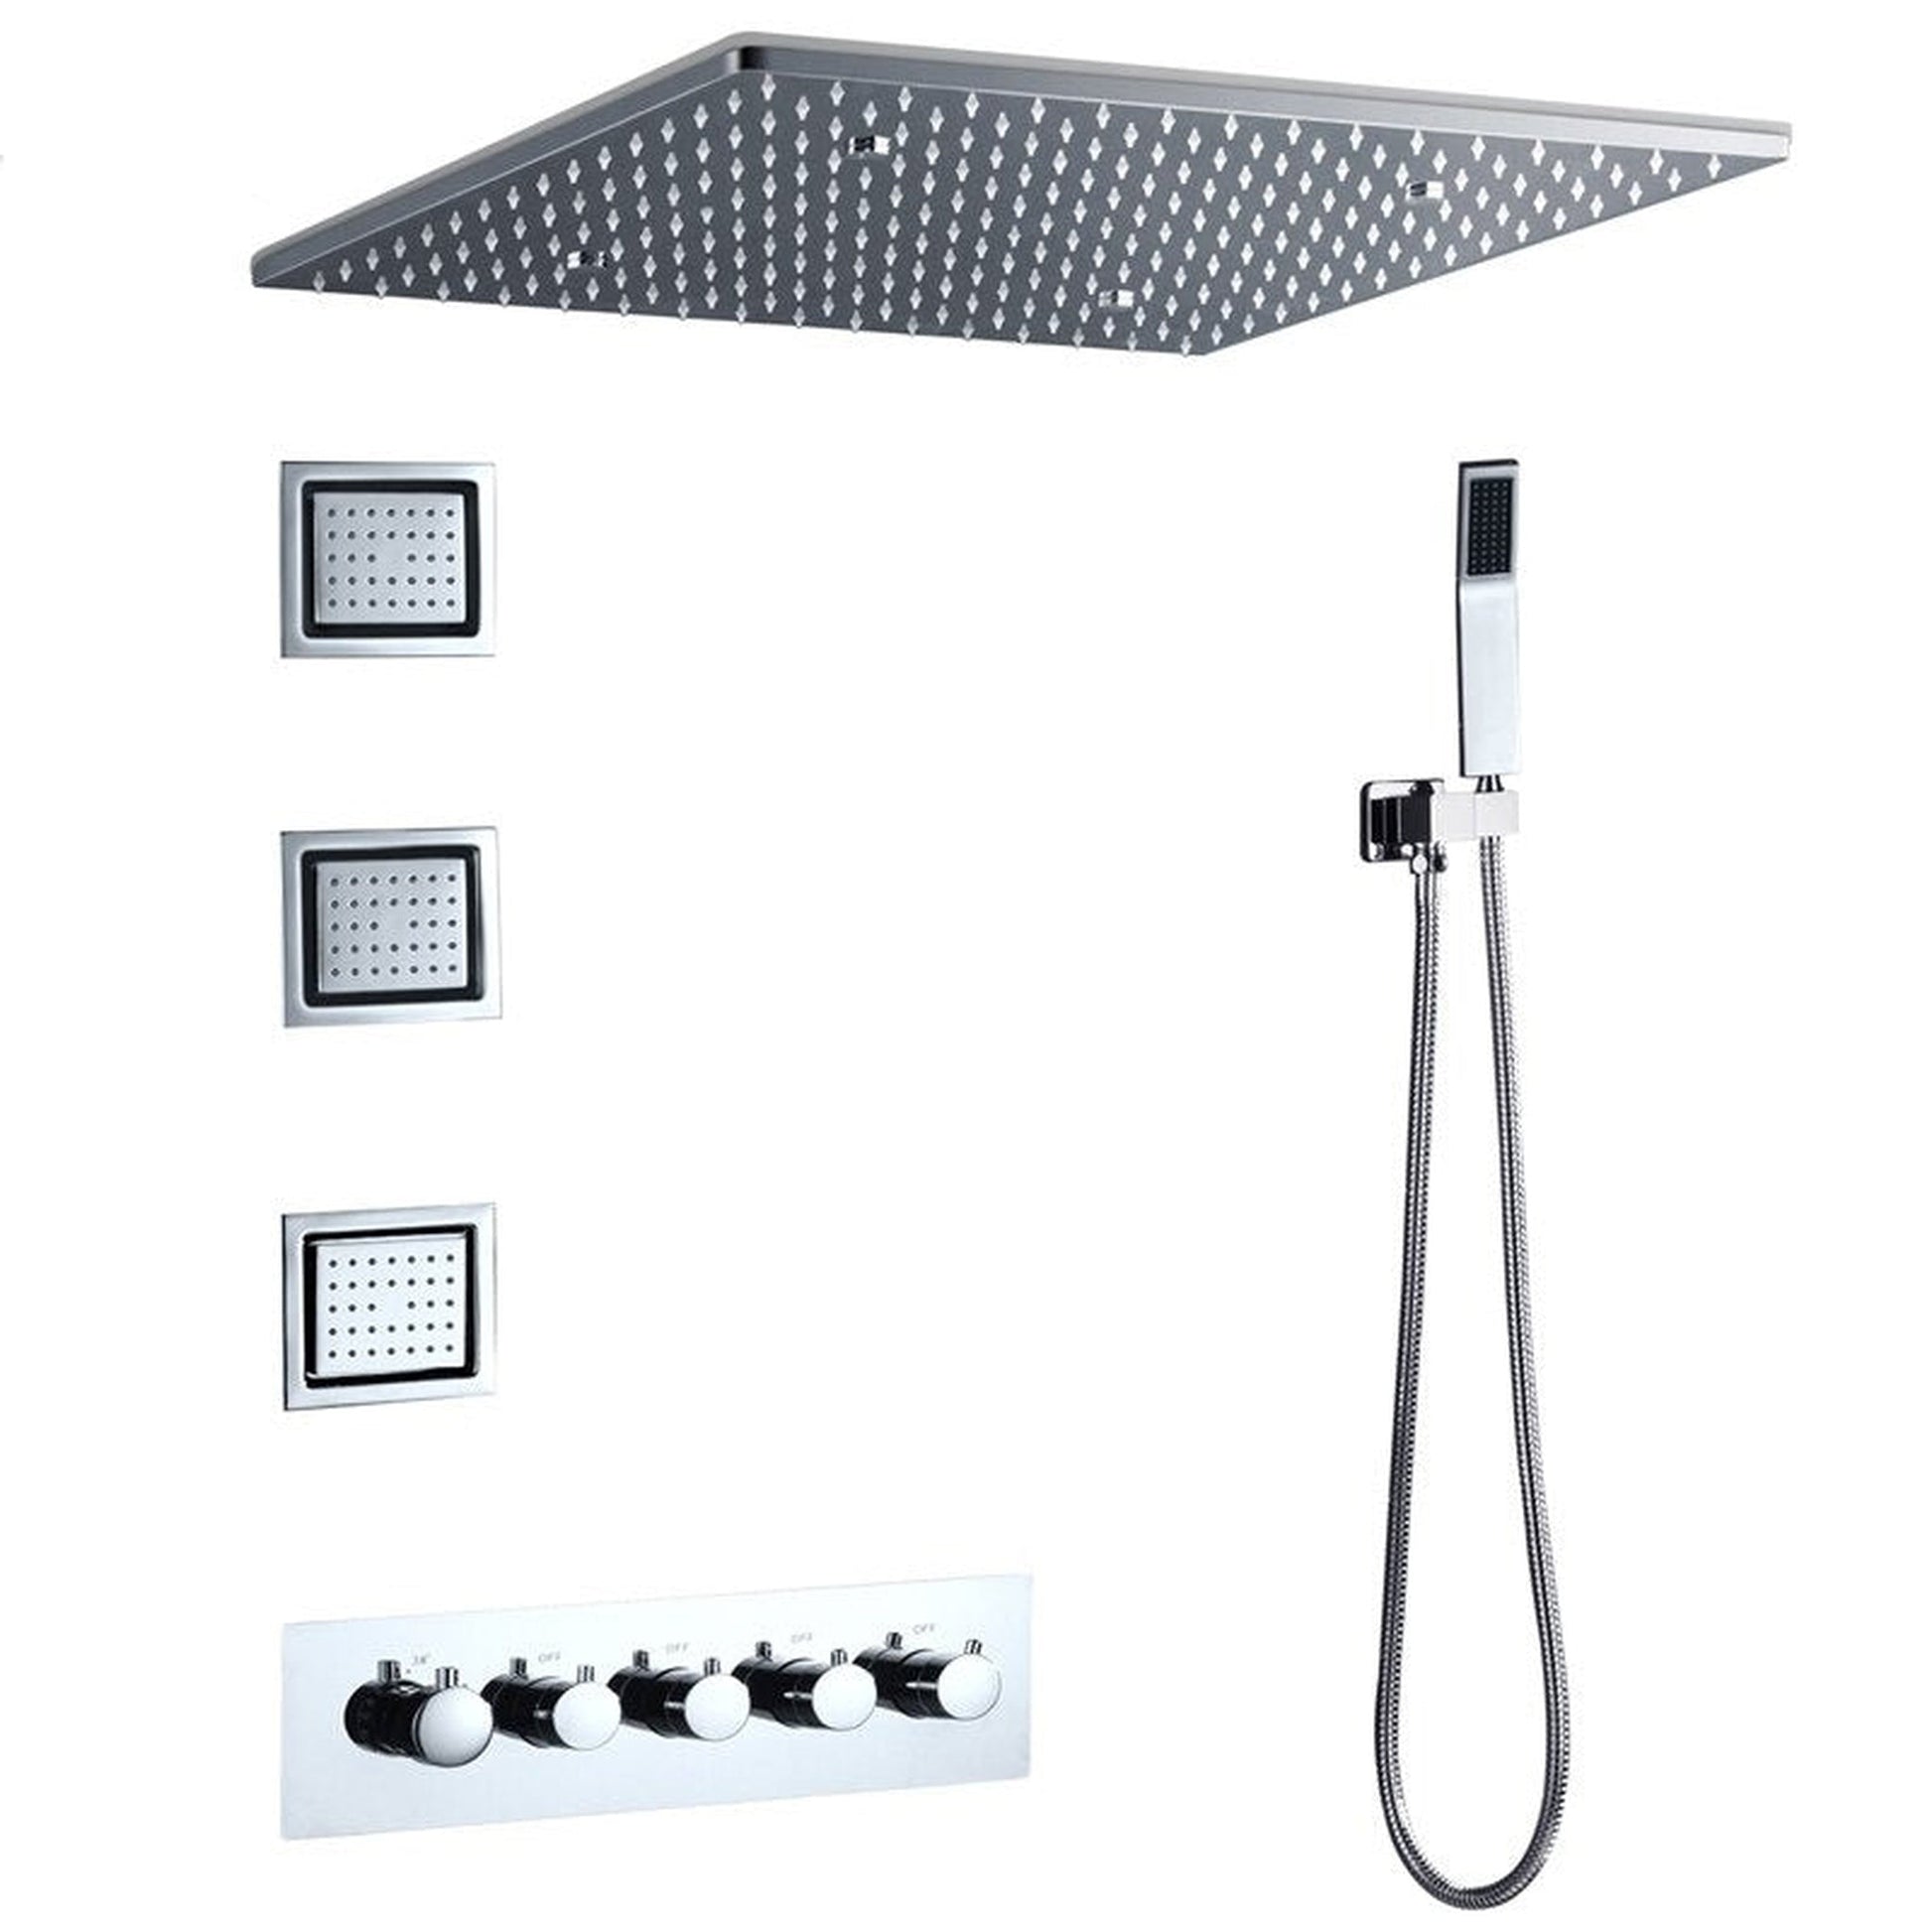 Fontana Bavaria Polished Chrome Ceiling Mounted Rainfall Shower System With 3-Body Jets and Hand Shower